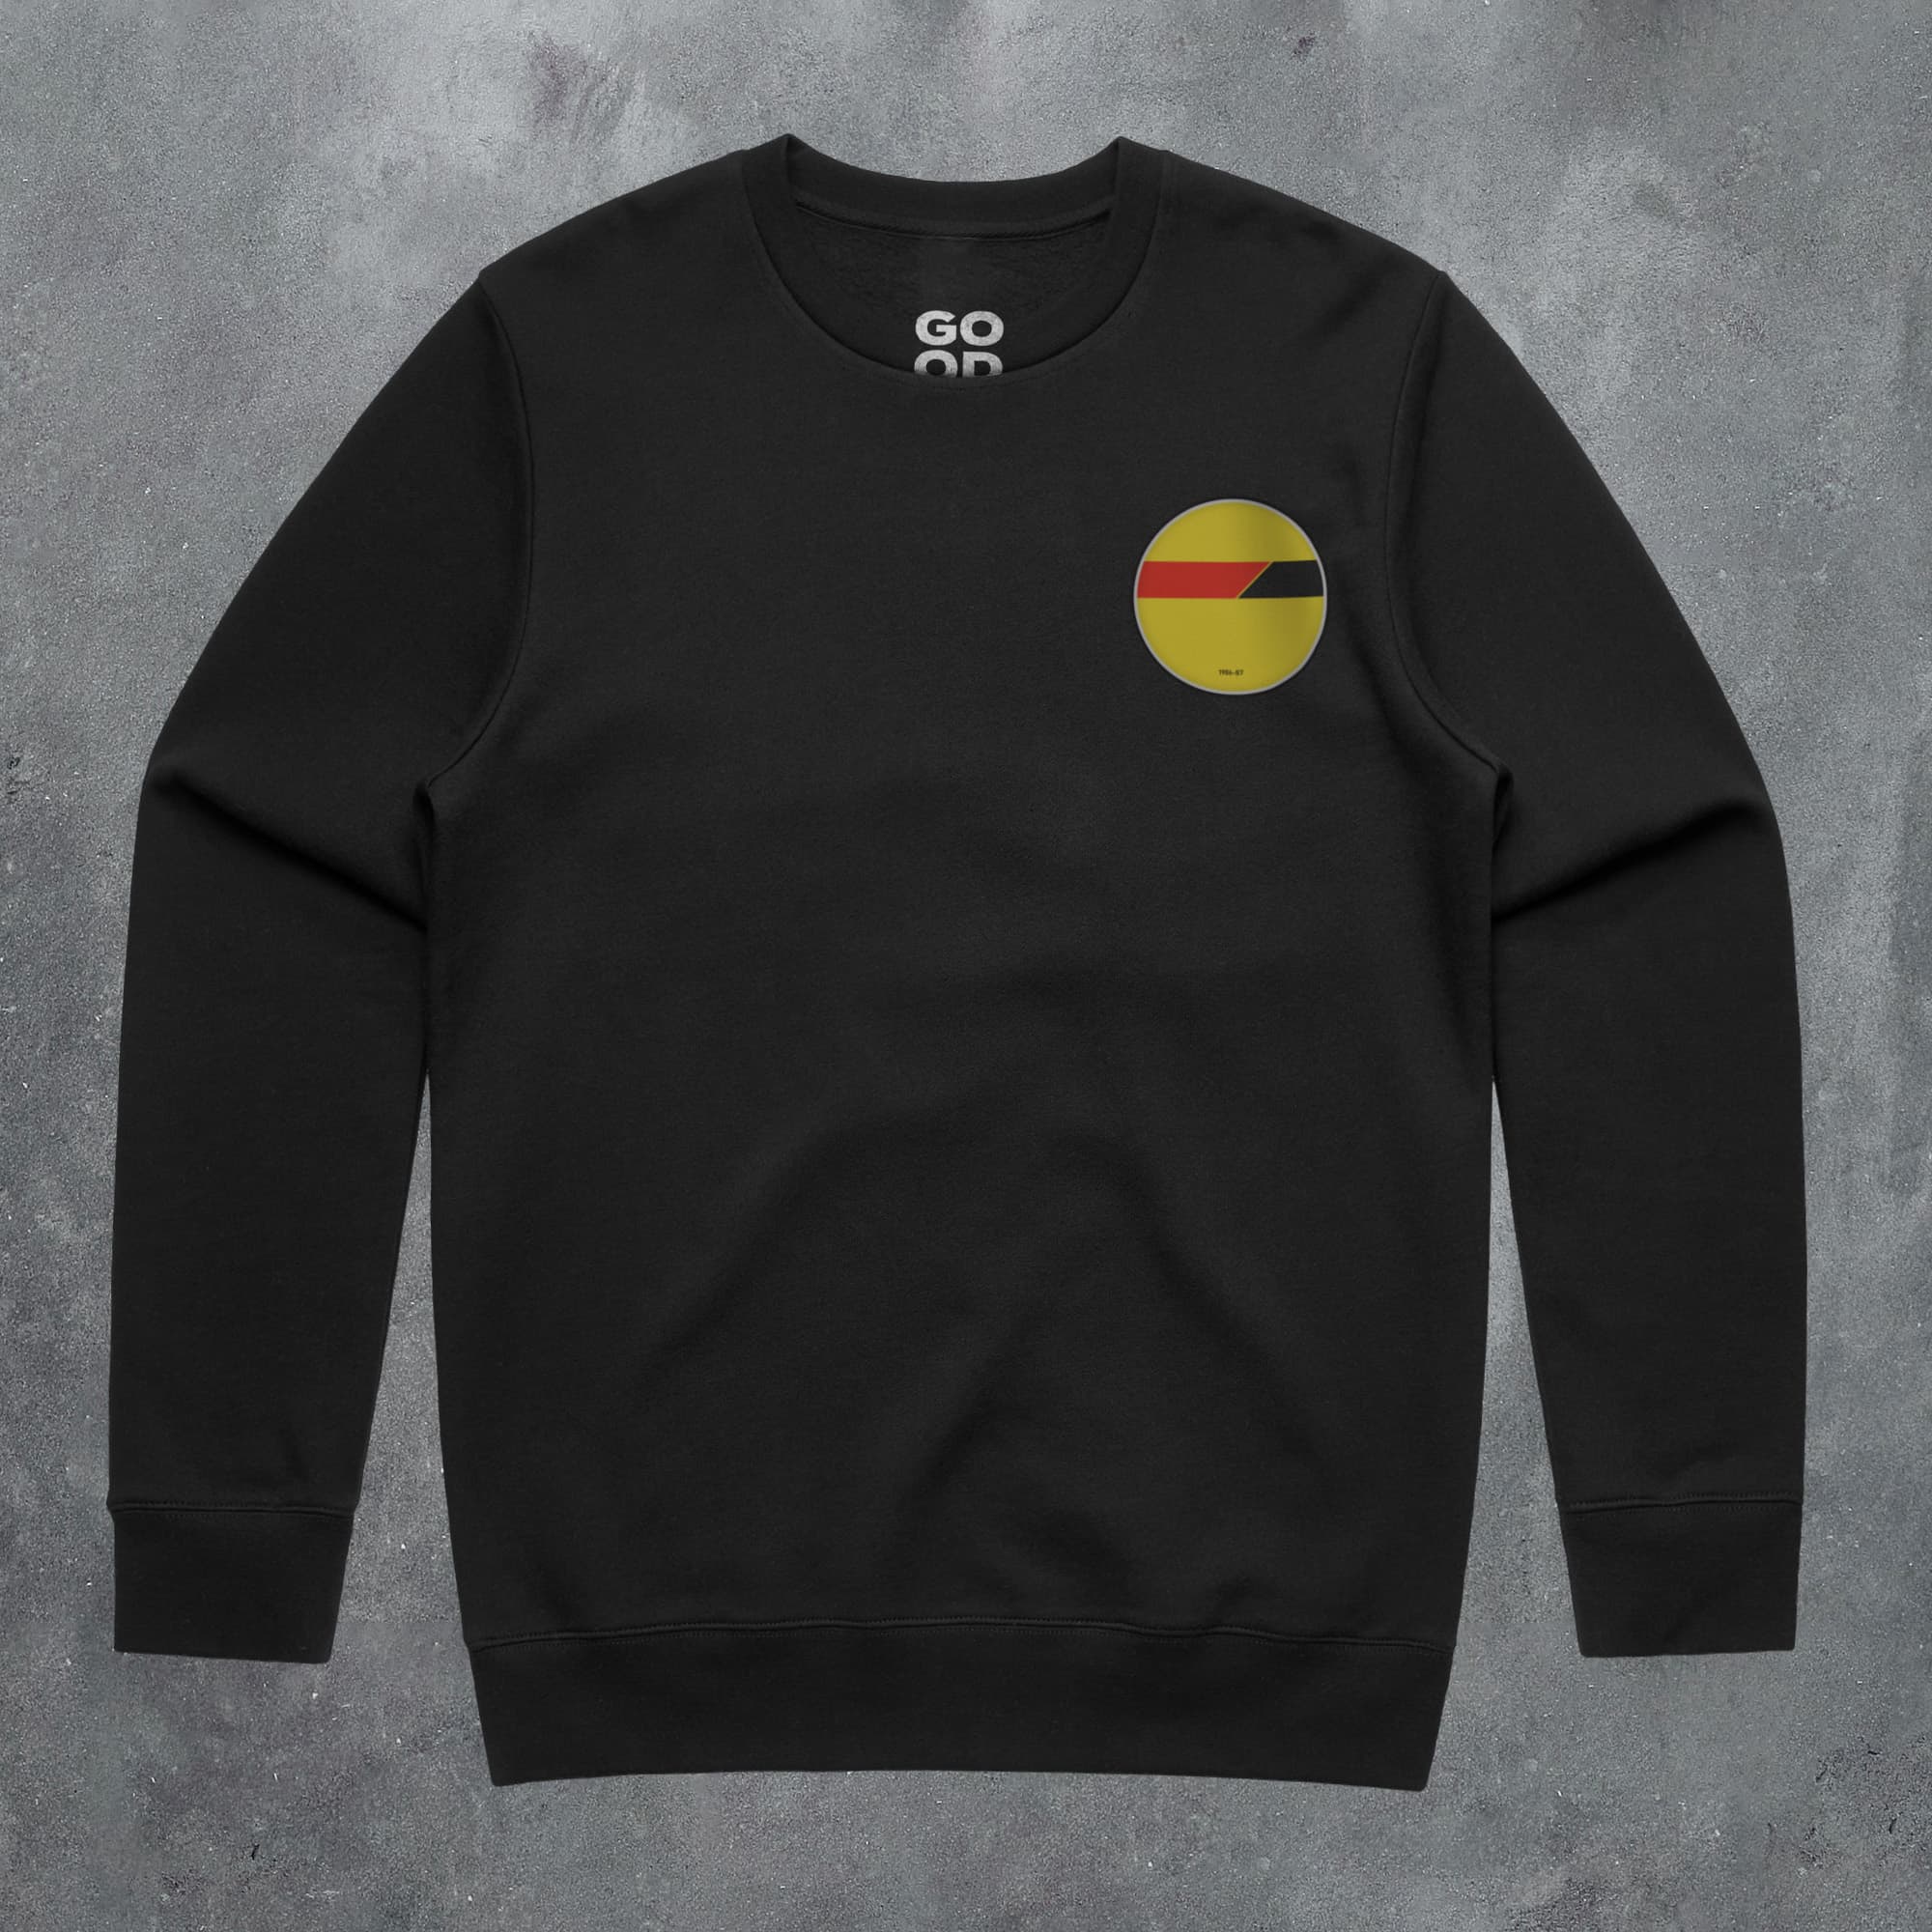 a black sweatshirt with a yellow and red circle on it